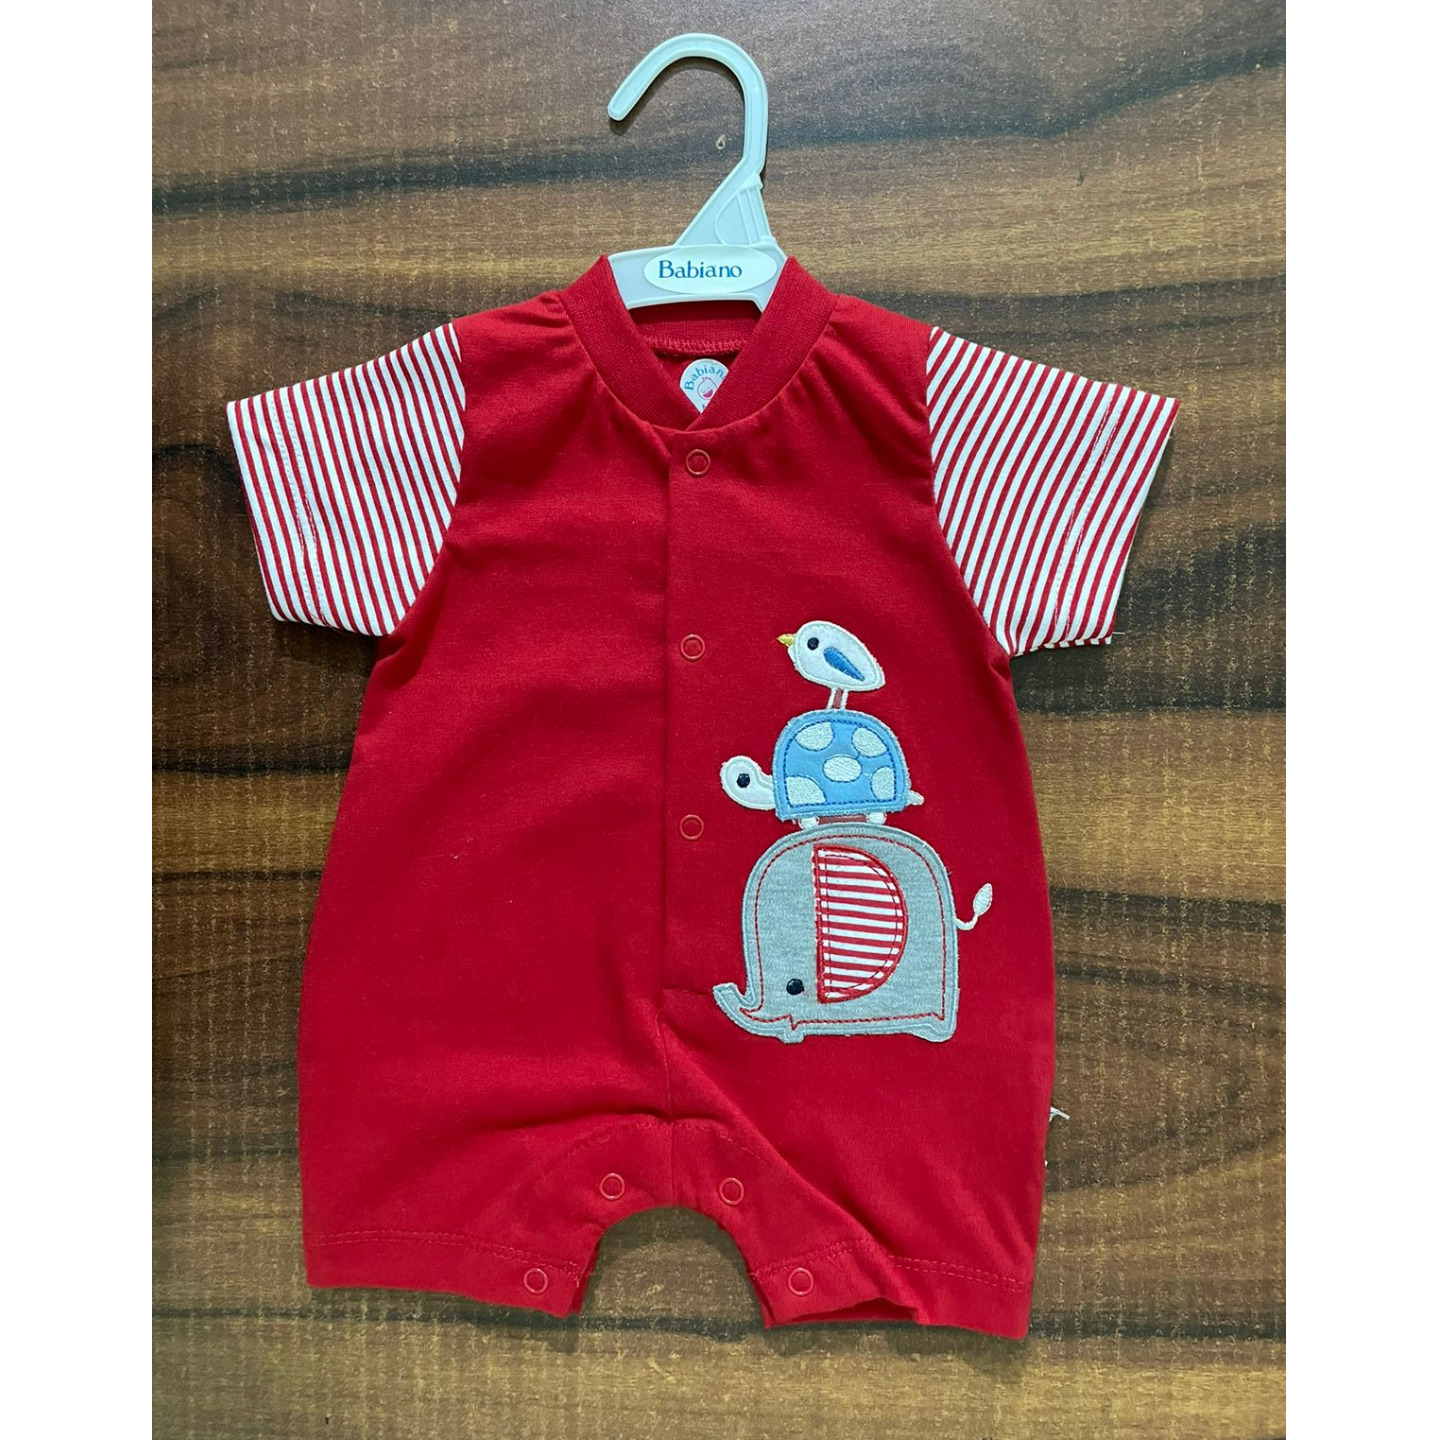 Babiano Romper 3Animals Design Made In India NB Size to 1 Year